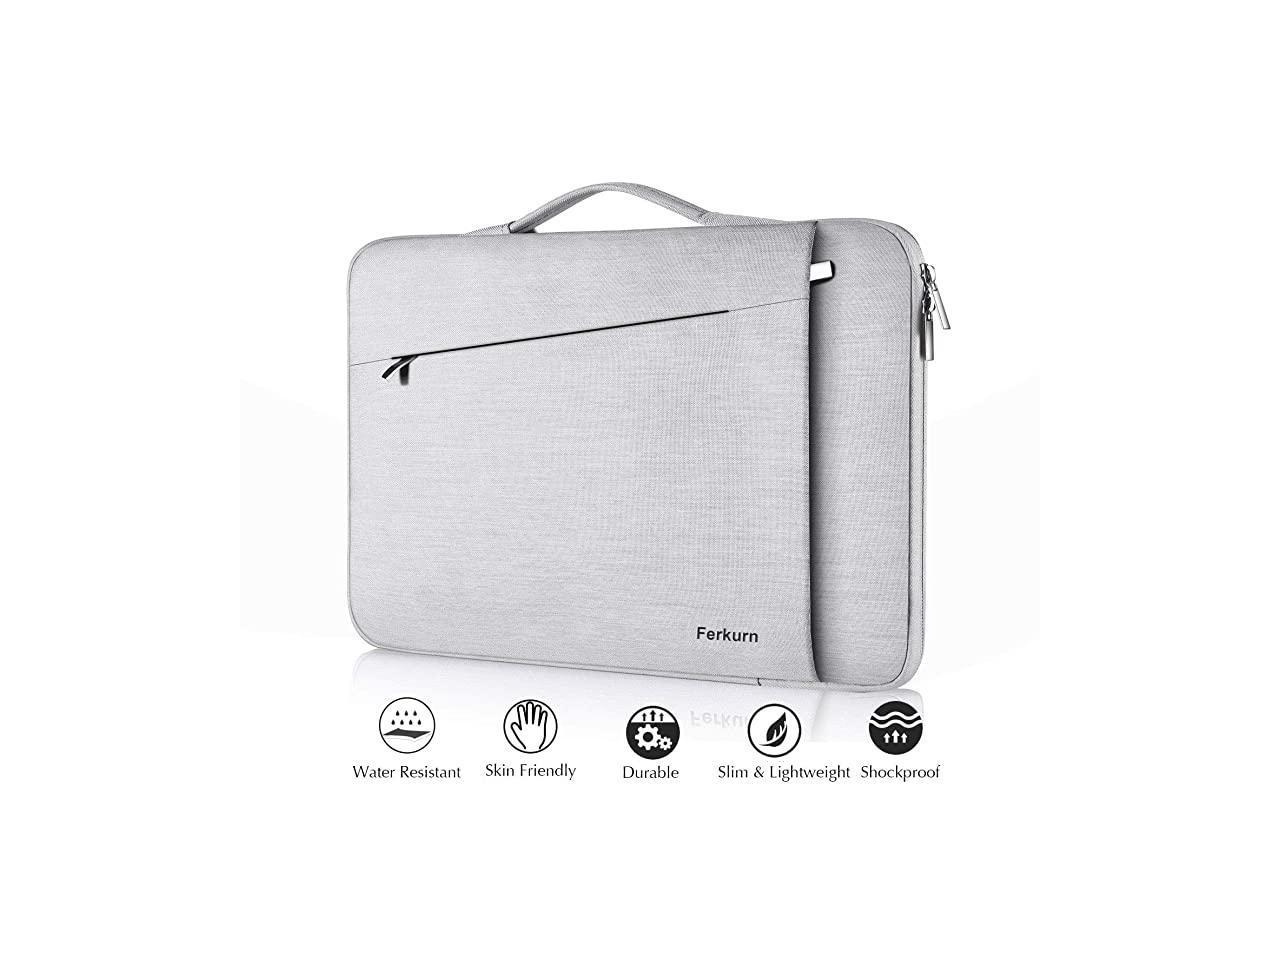 Kogzzen 13 13.3 13.5 Inch Laptop Sleeve Compatible with MacBook Air 13.3// MacBook Pro 13// Dell XPS 13// Surface Laptop 13.5// iPad Pro 12.9 Gray HP Lenovo Asus Acer Chromebook Waterproof Case Bag